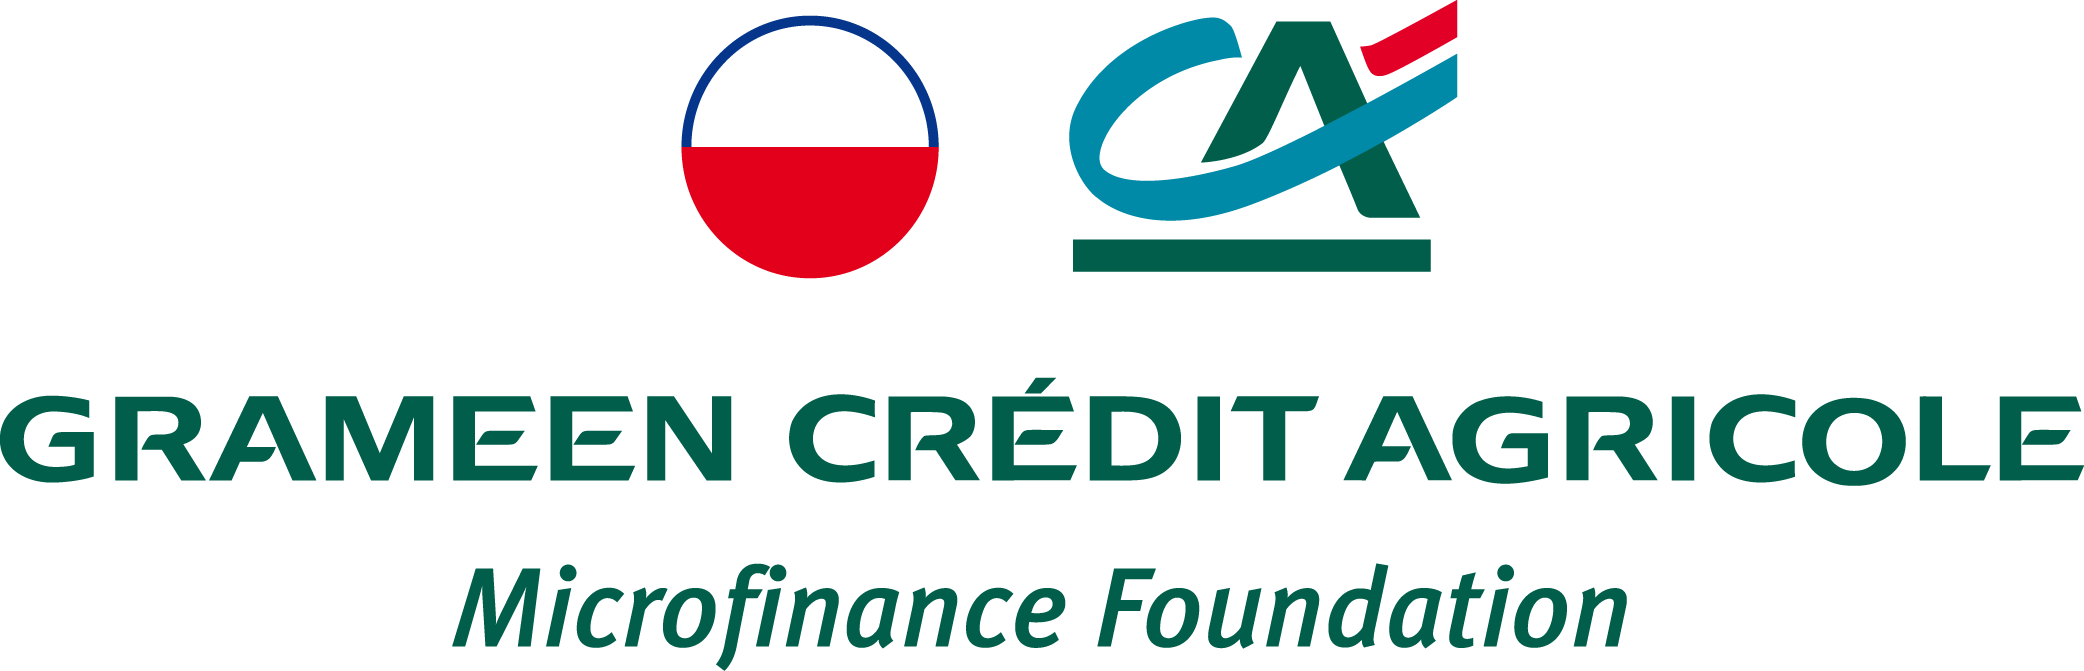 Grameen Credit Agricole Foundation